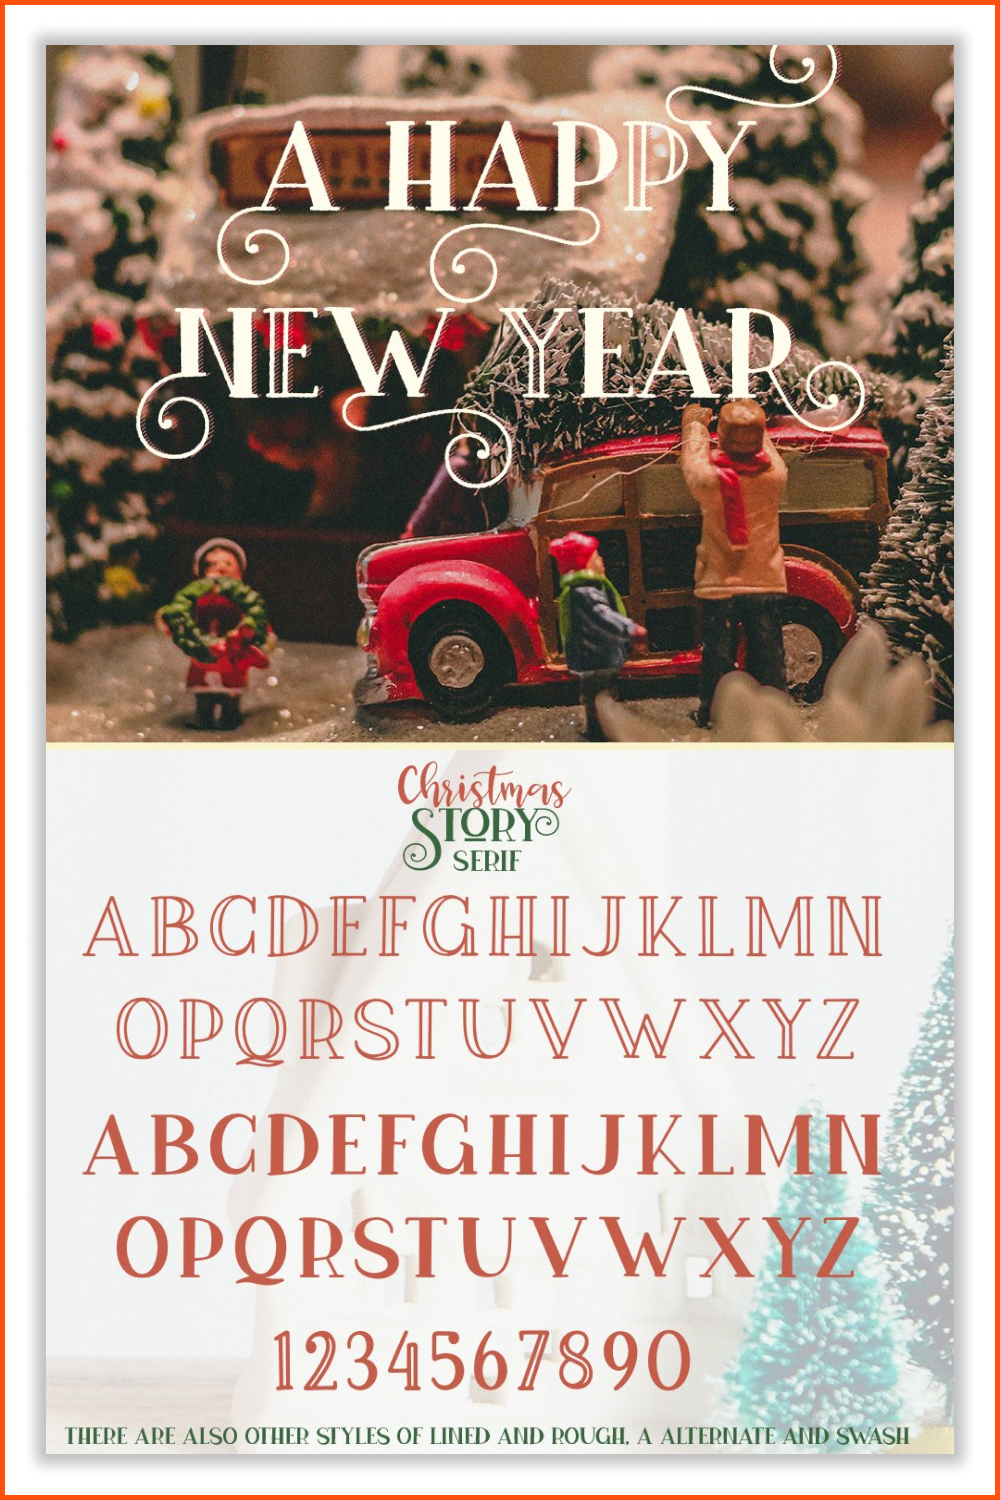 Collage of images of the Christmas story and the alphabet.